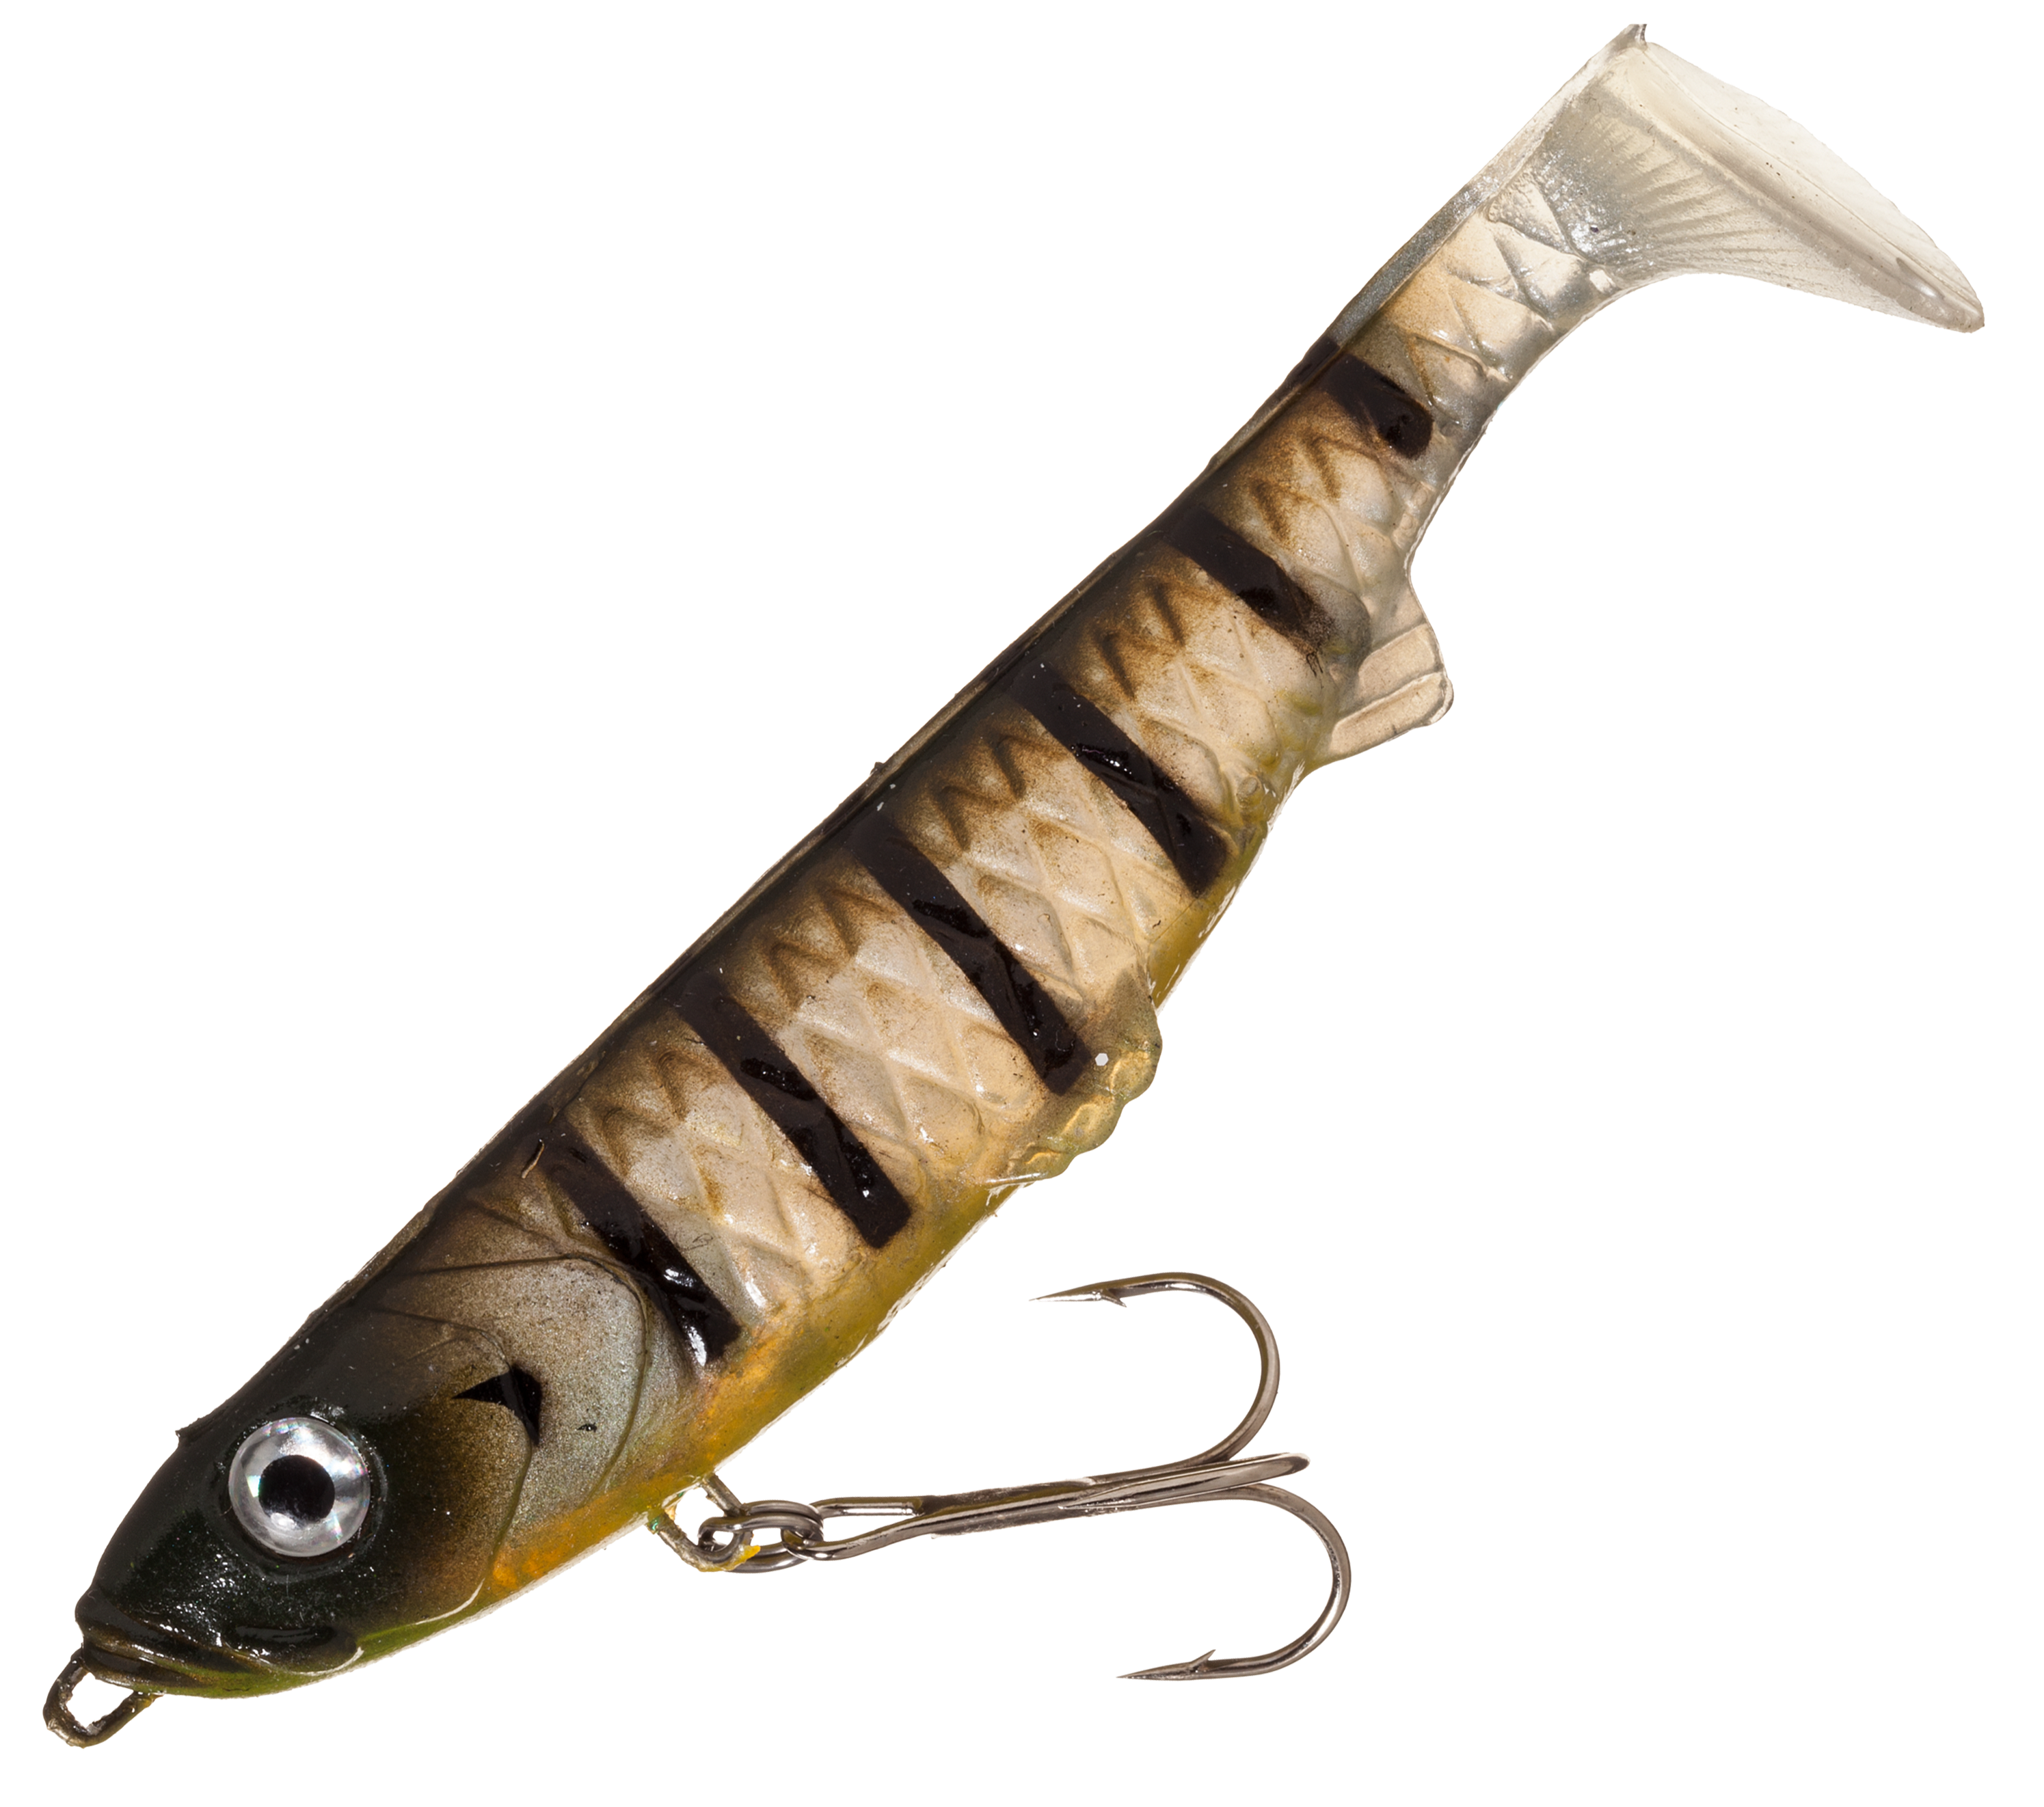 Bass Pro Xps Frog Lure